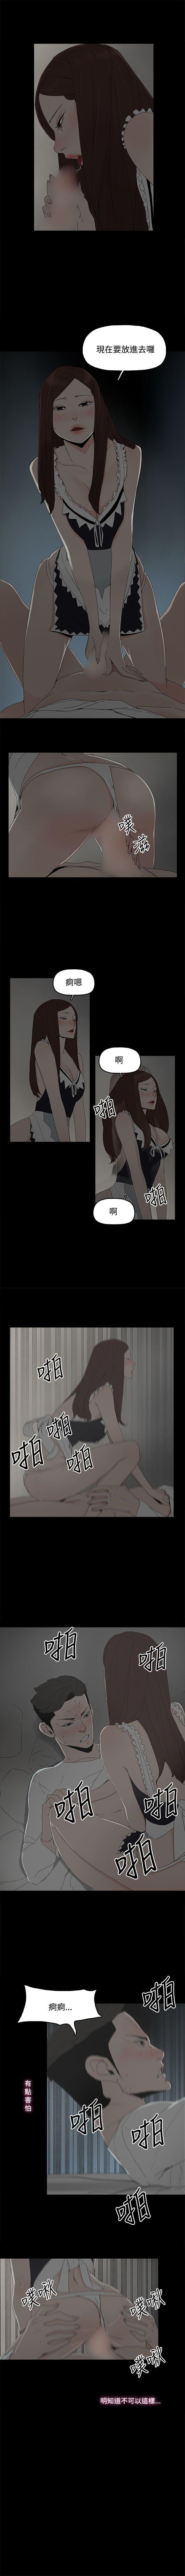 Cum Swallow 代理孕母 14 [Chinese] Manhwa Facefuck - Page 5